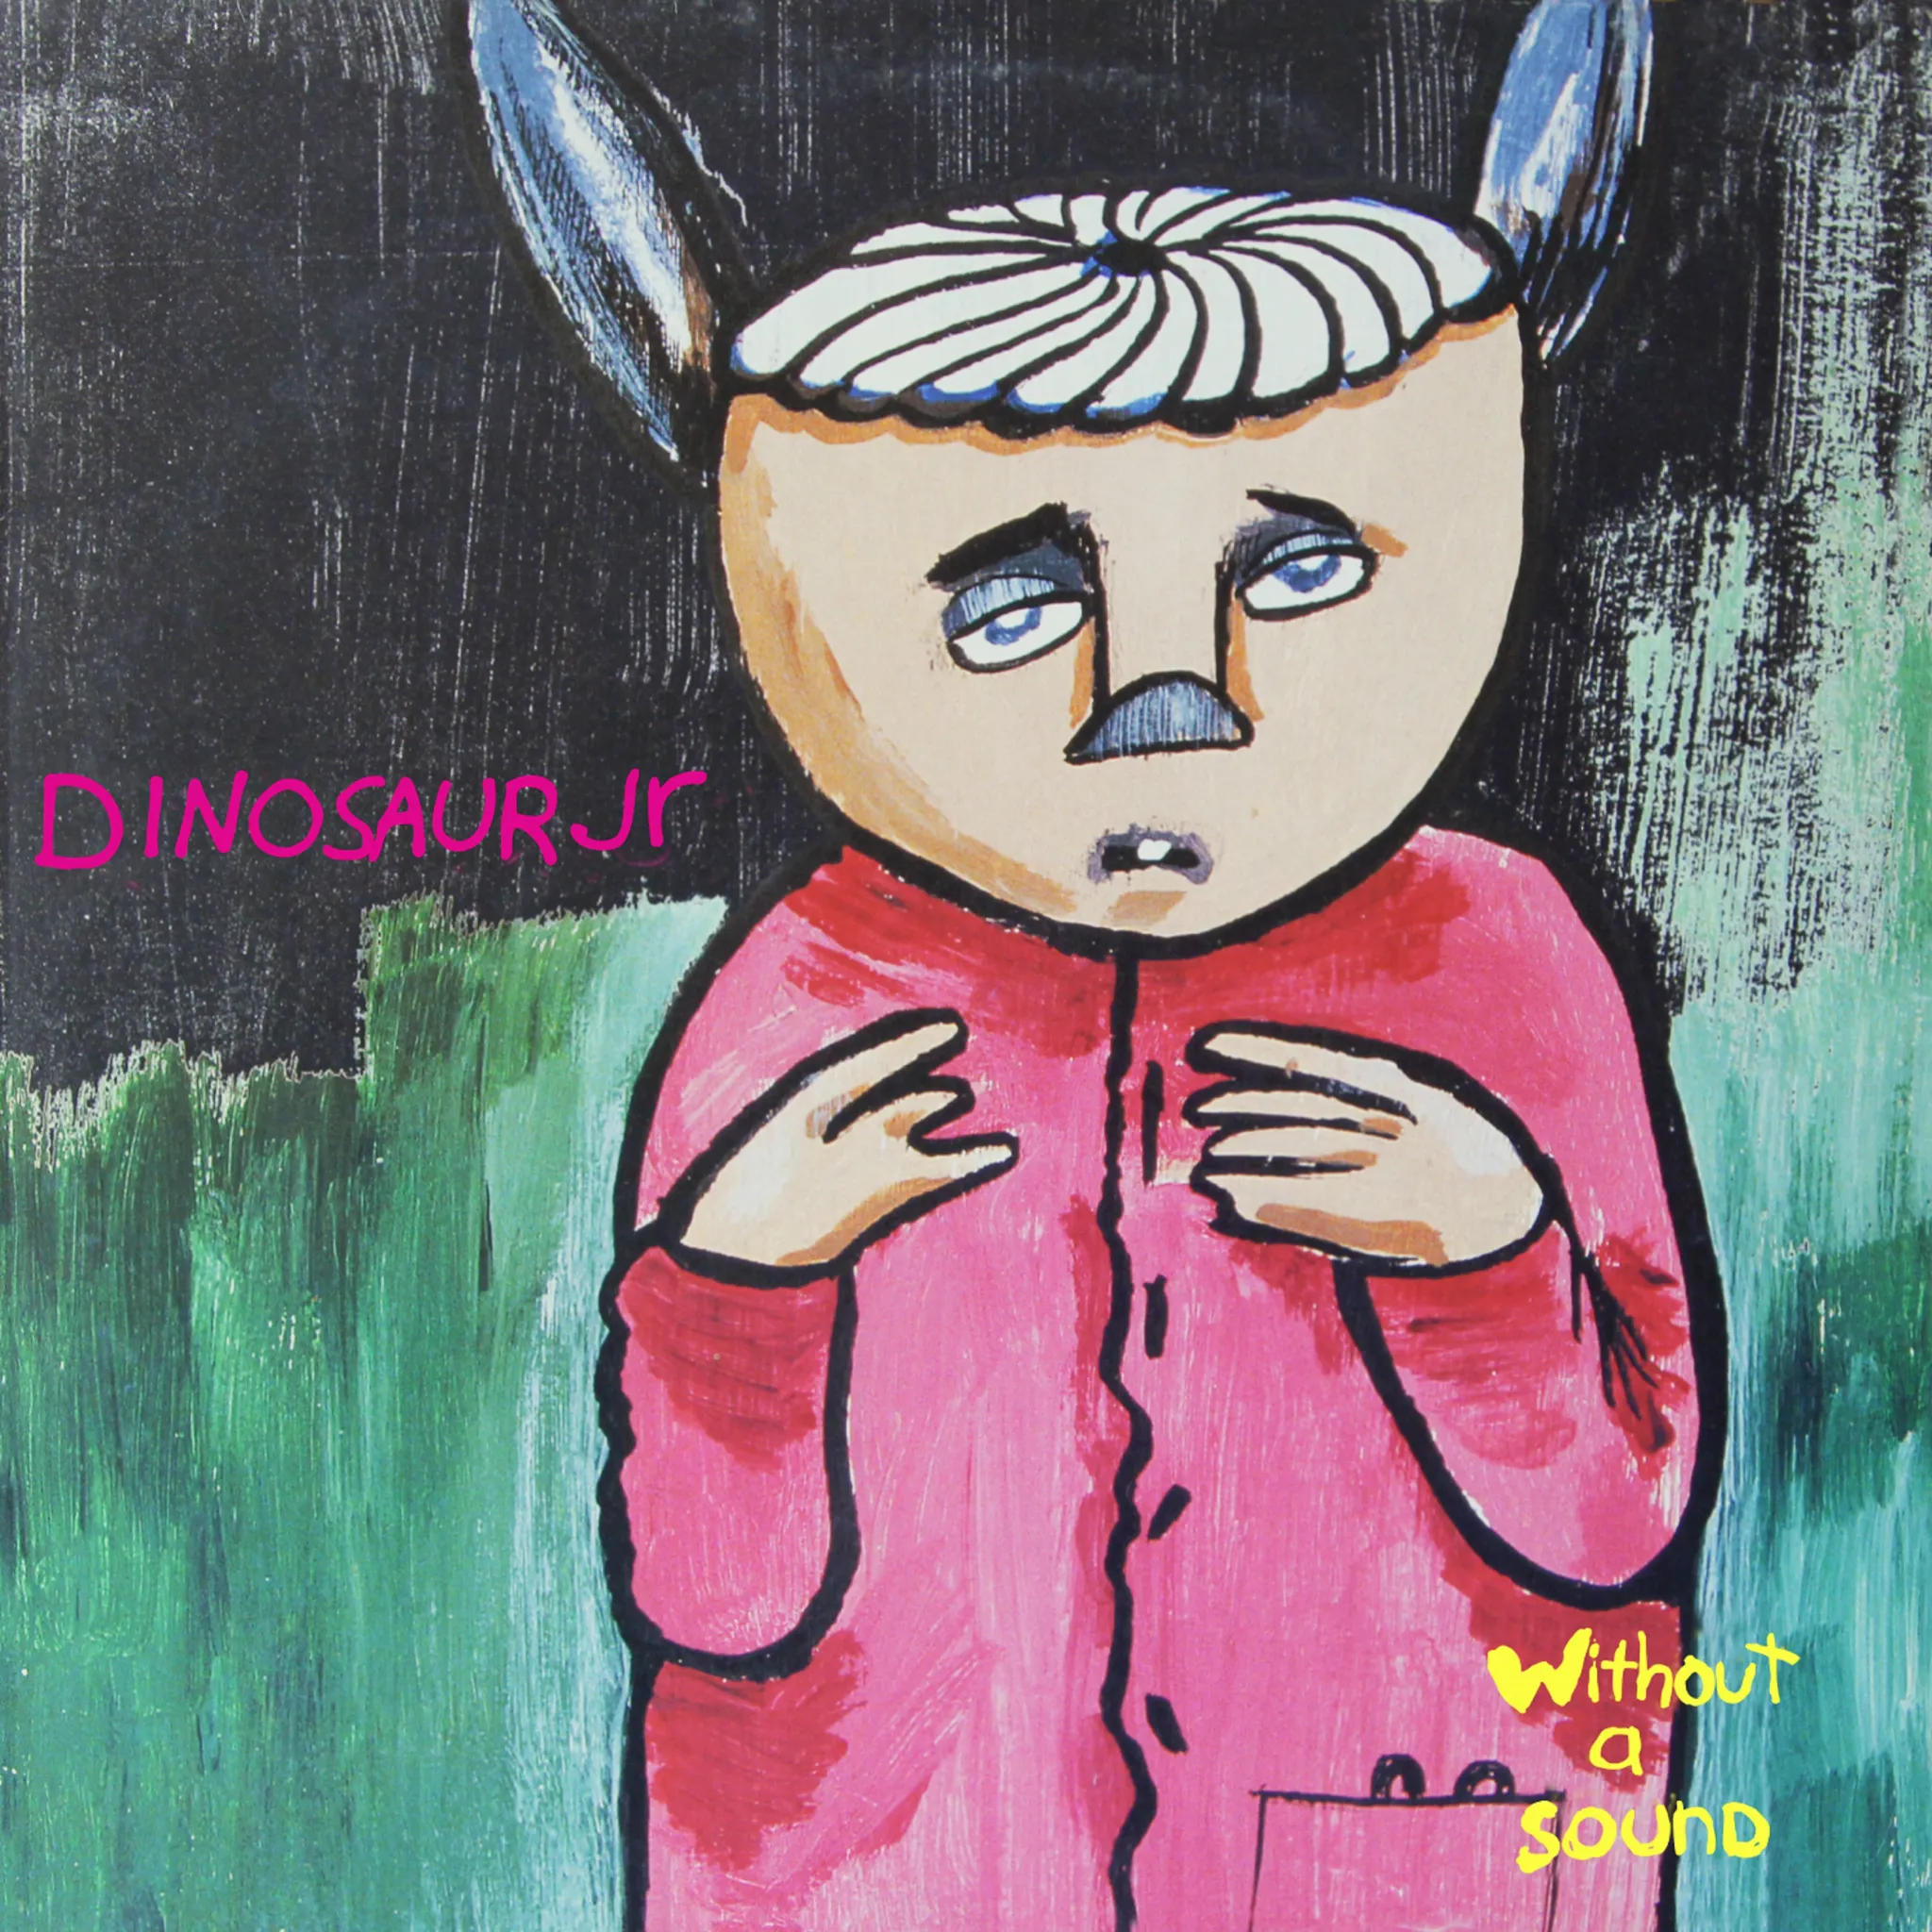 Dinosaur Jr - Without a Sound (Expanded) artwork